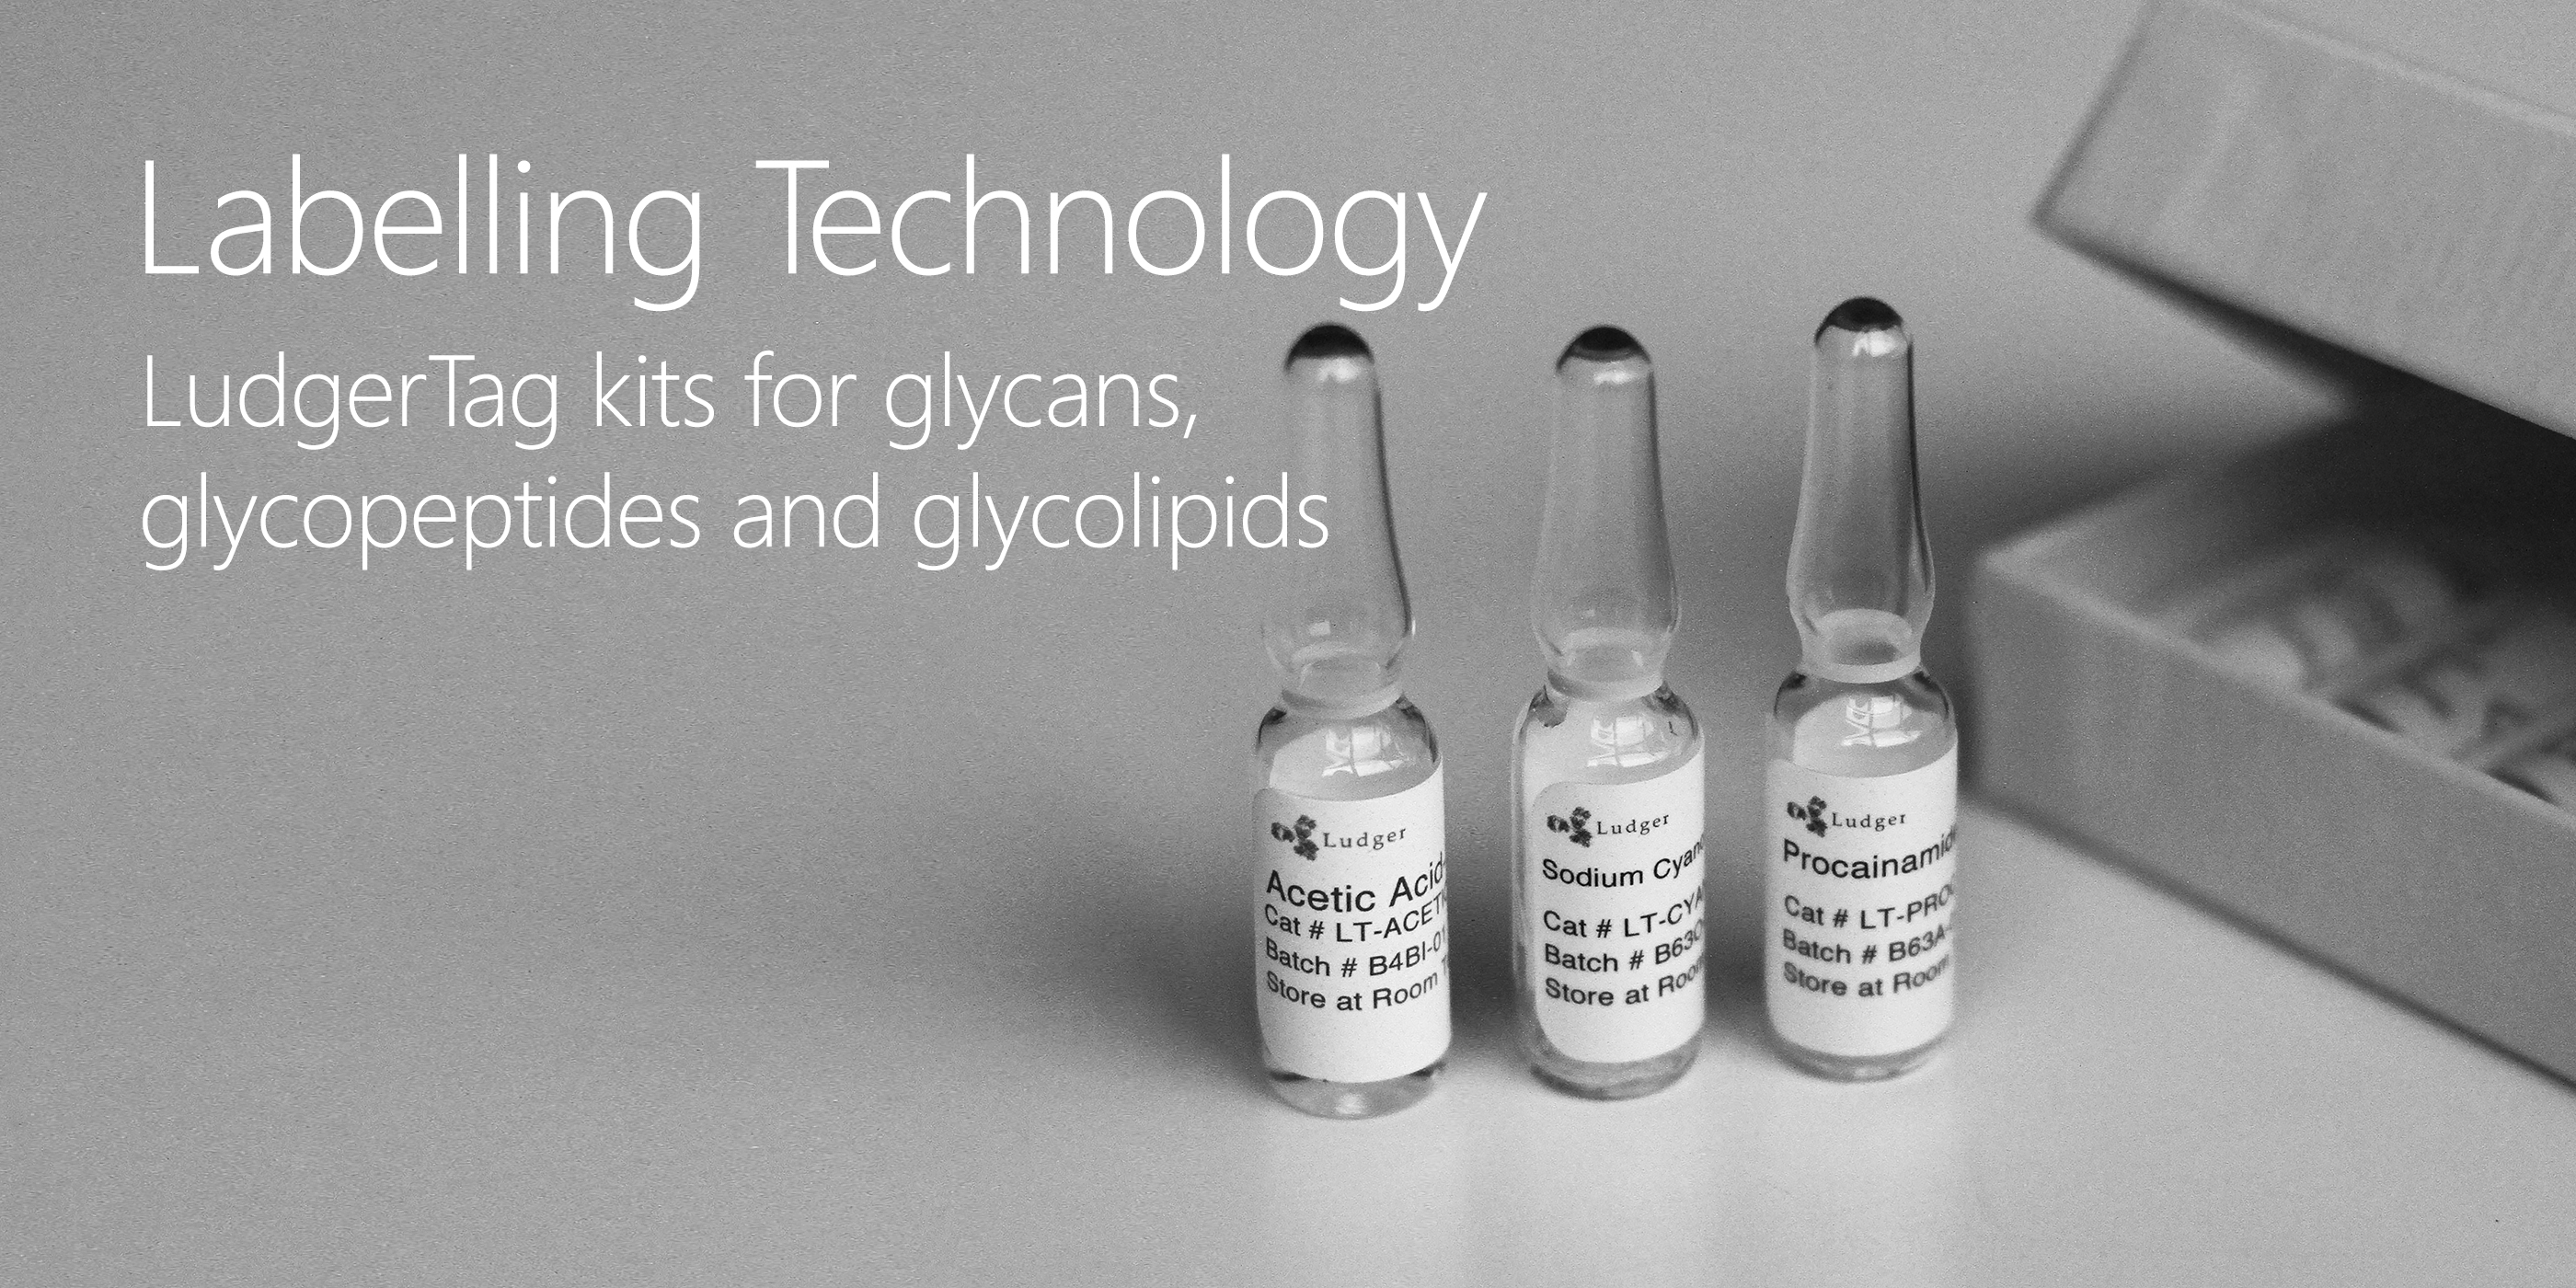 Ludger Glycan Labelling Technology